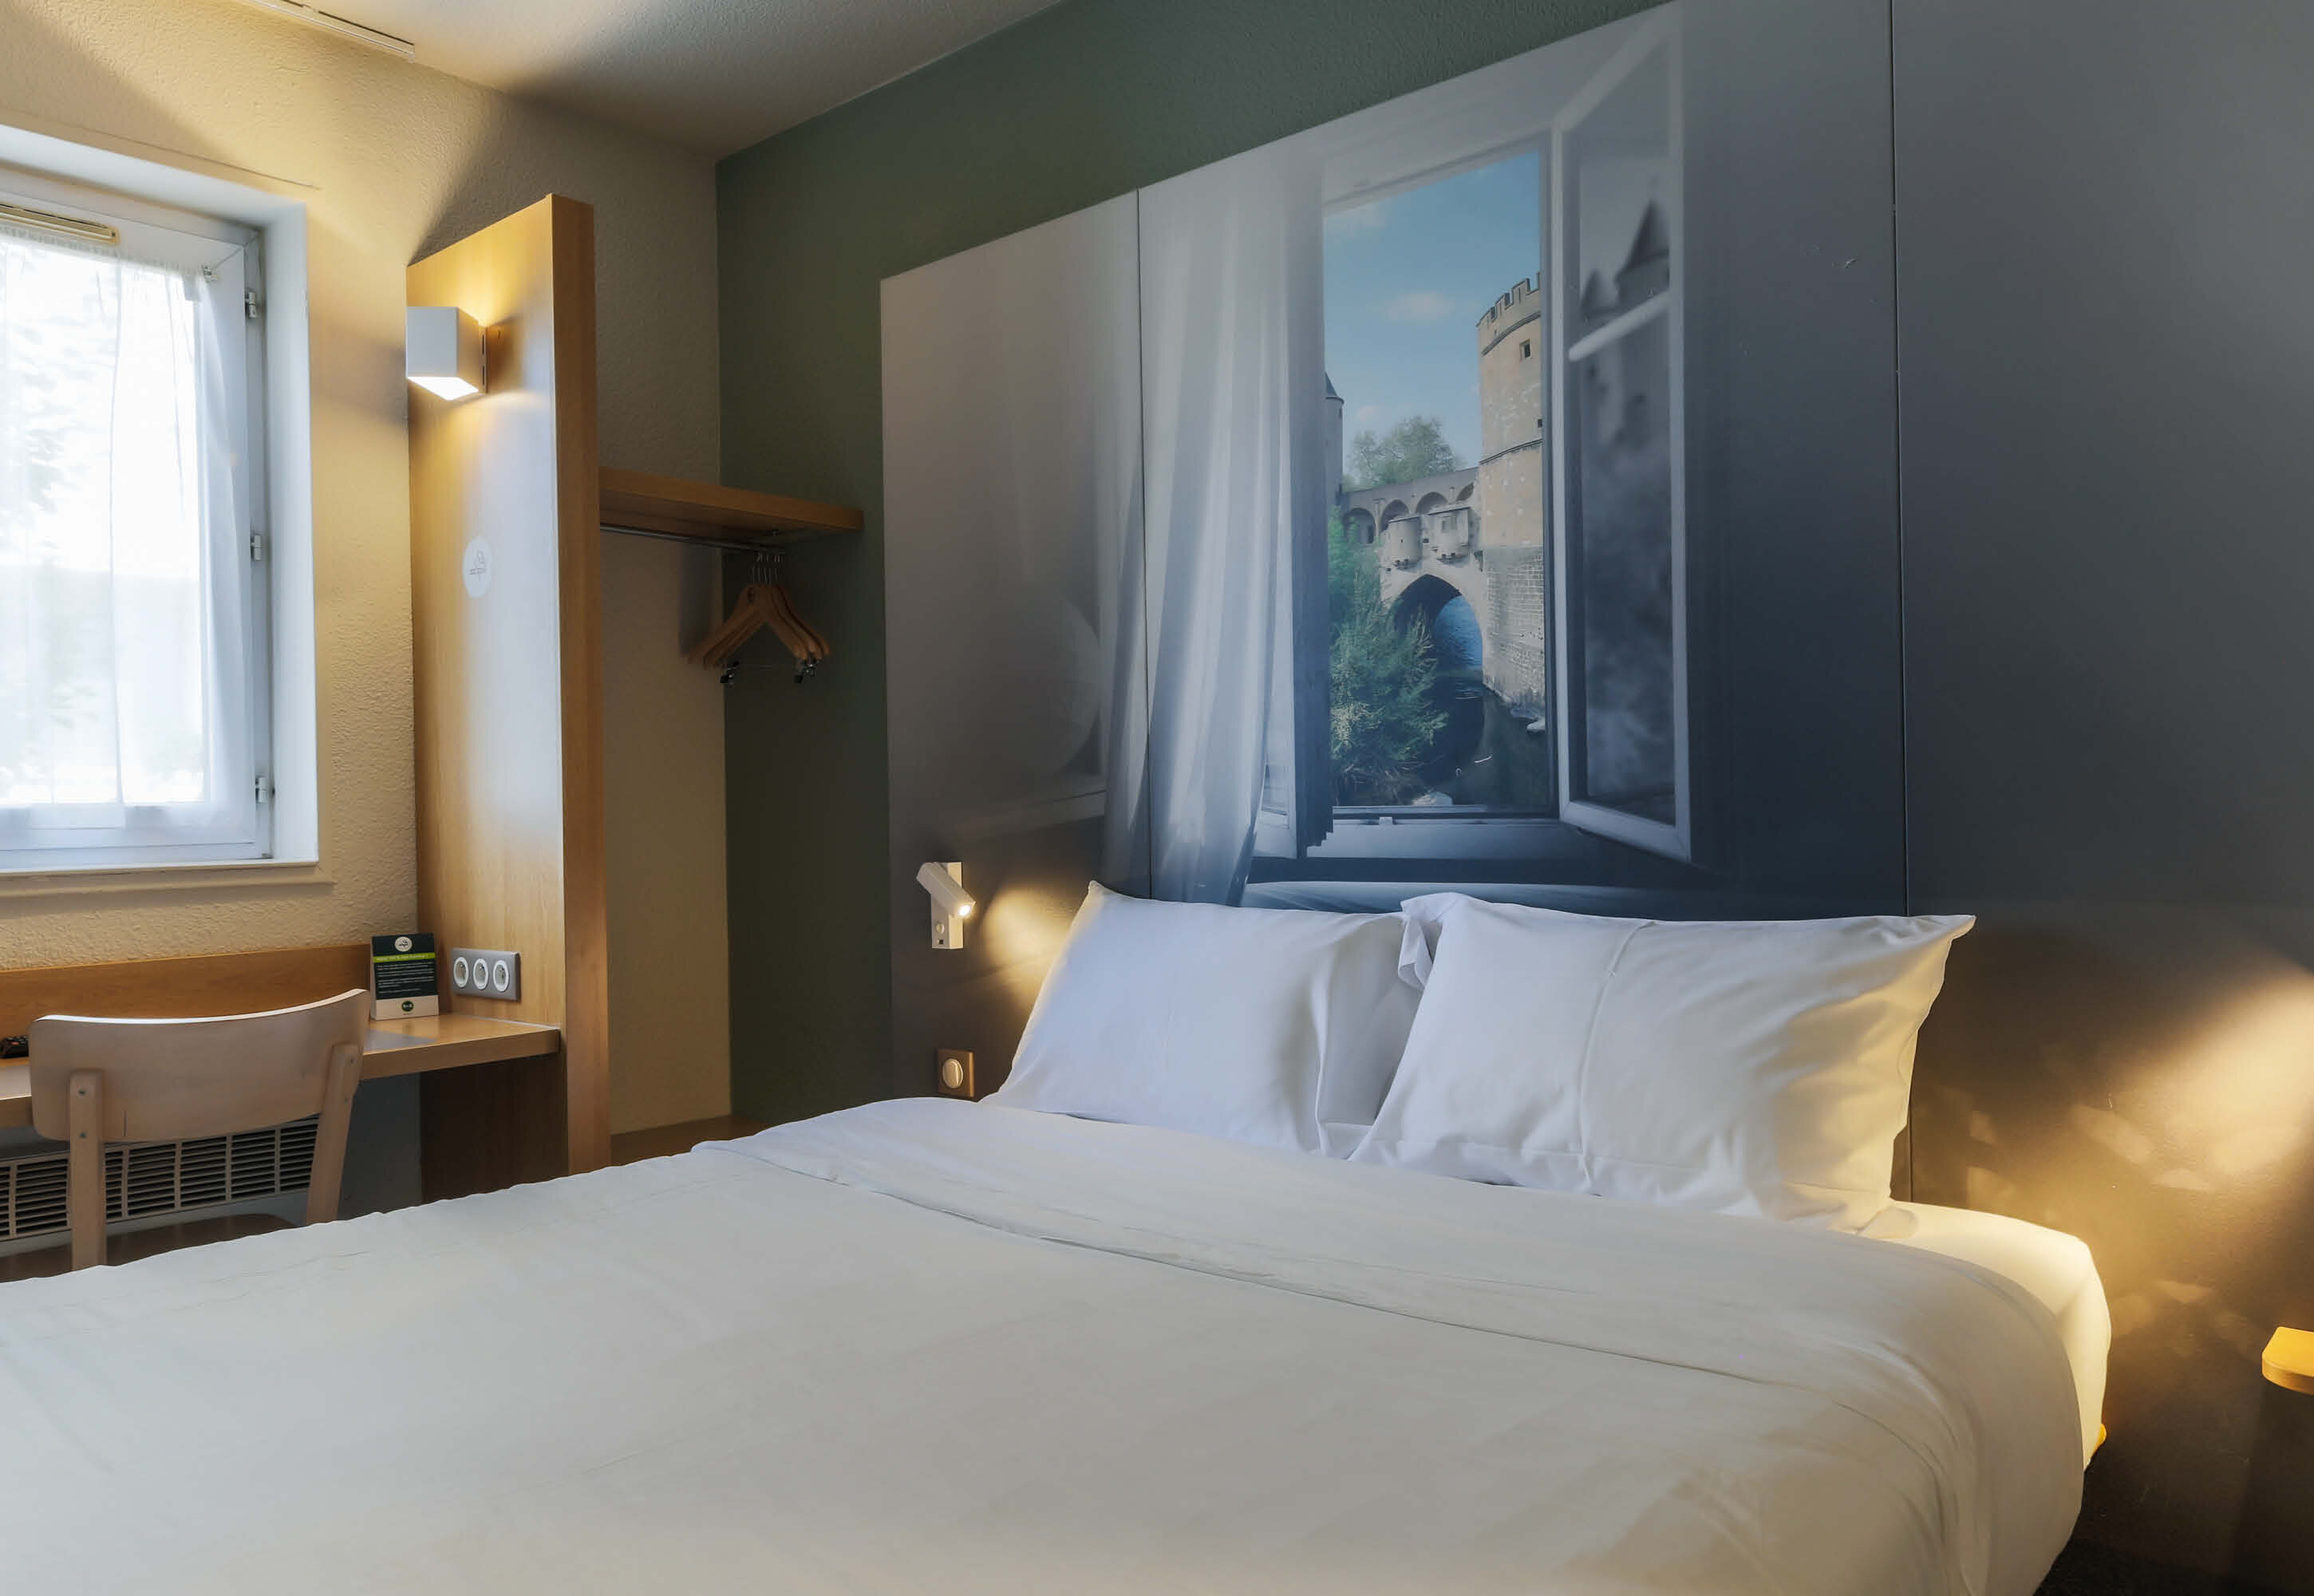 Images B&B HOTEL Metz Jouy-aux-Arches